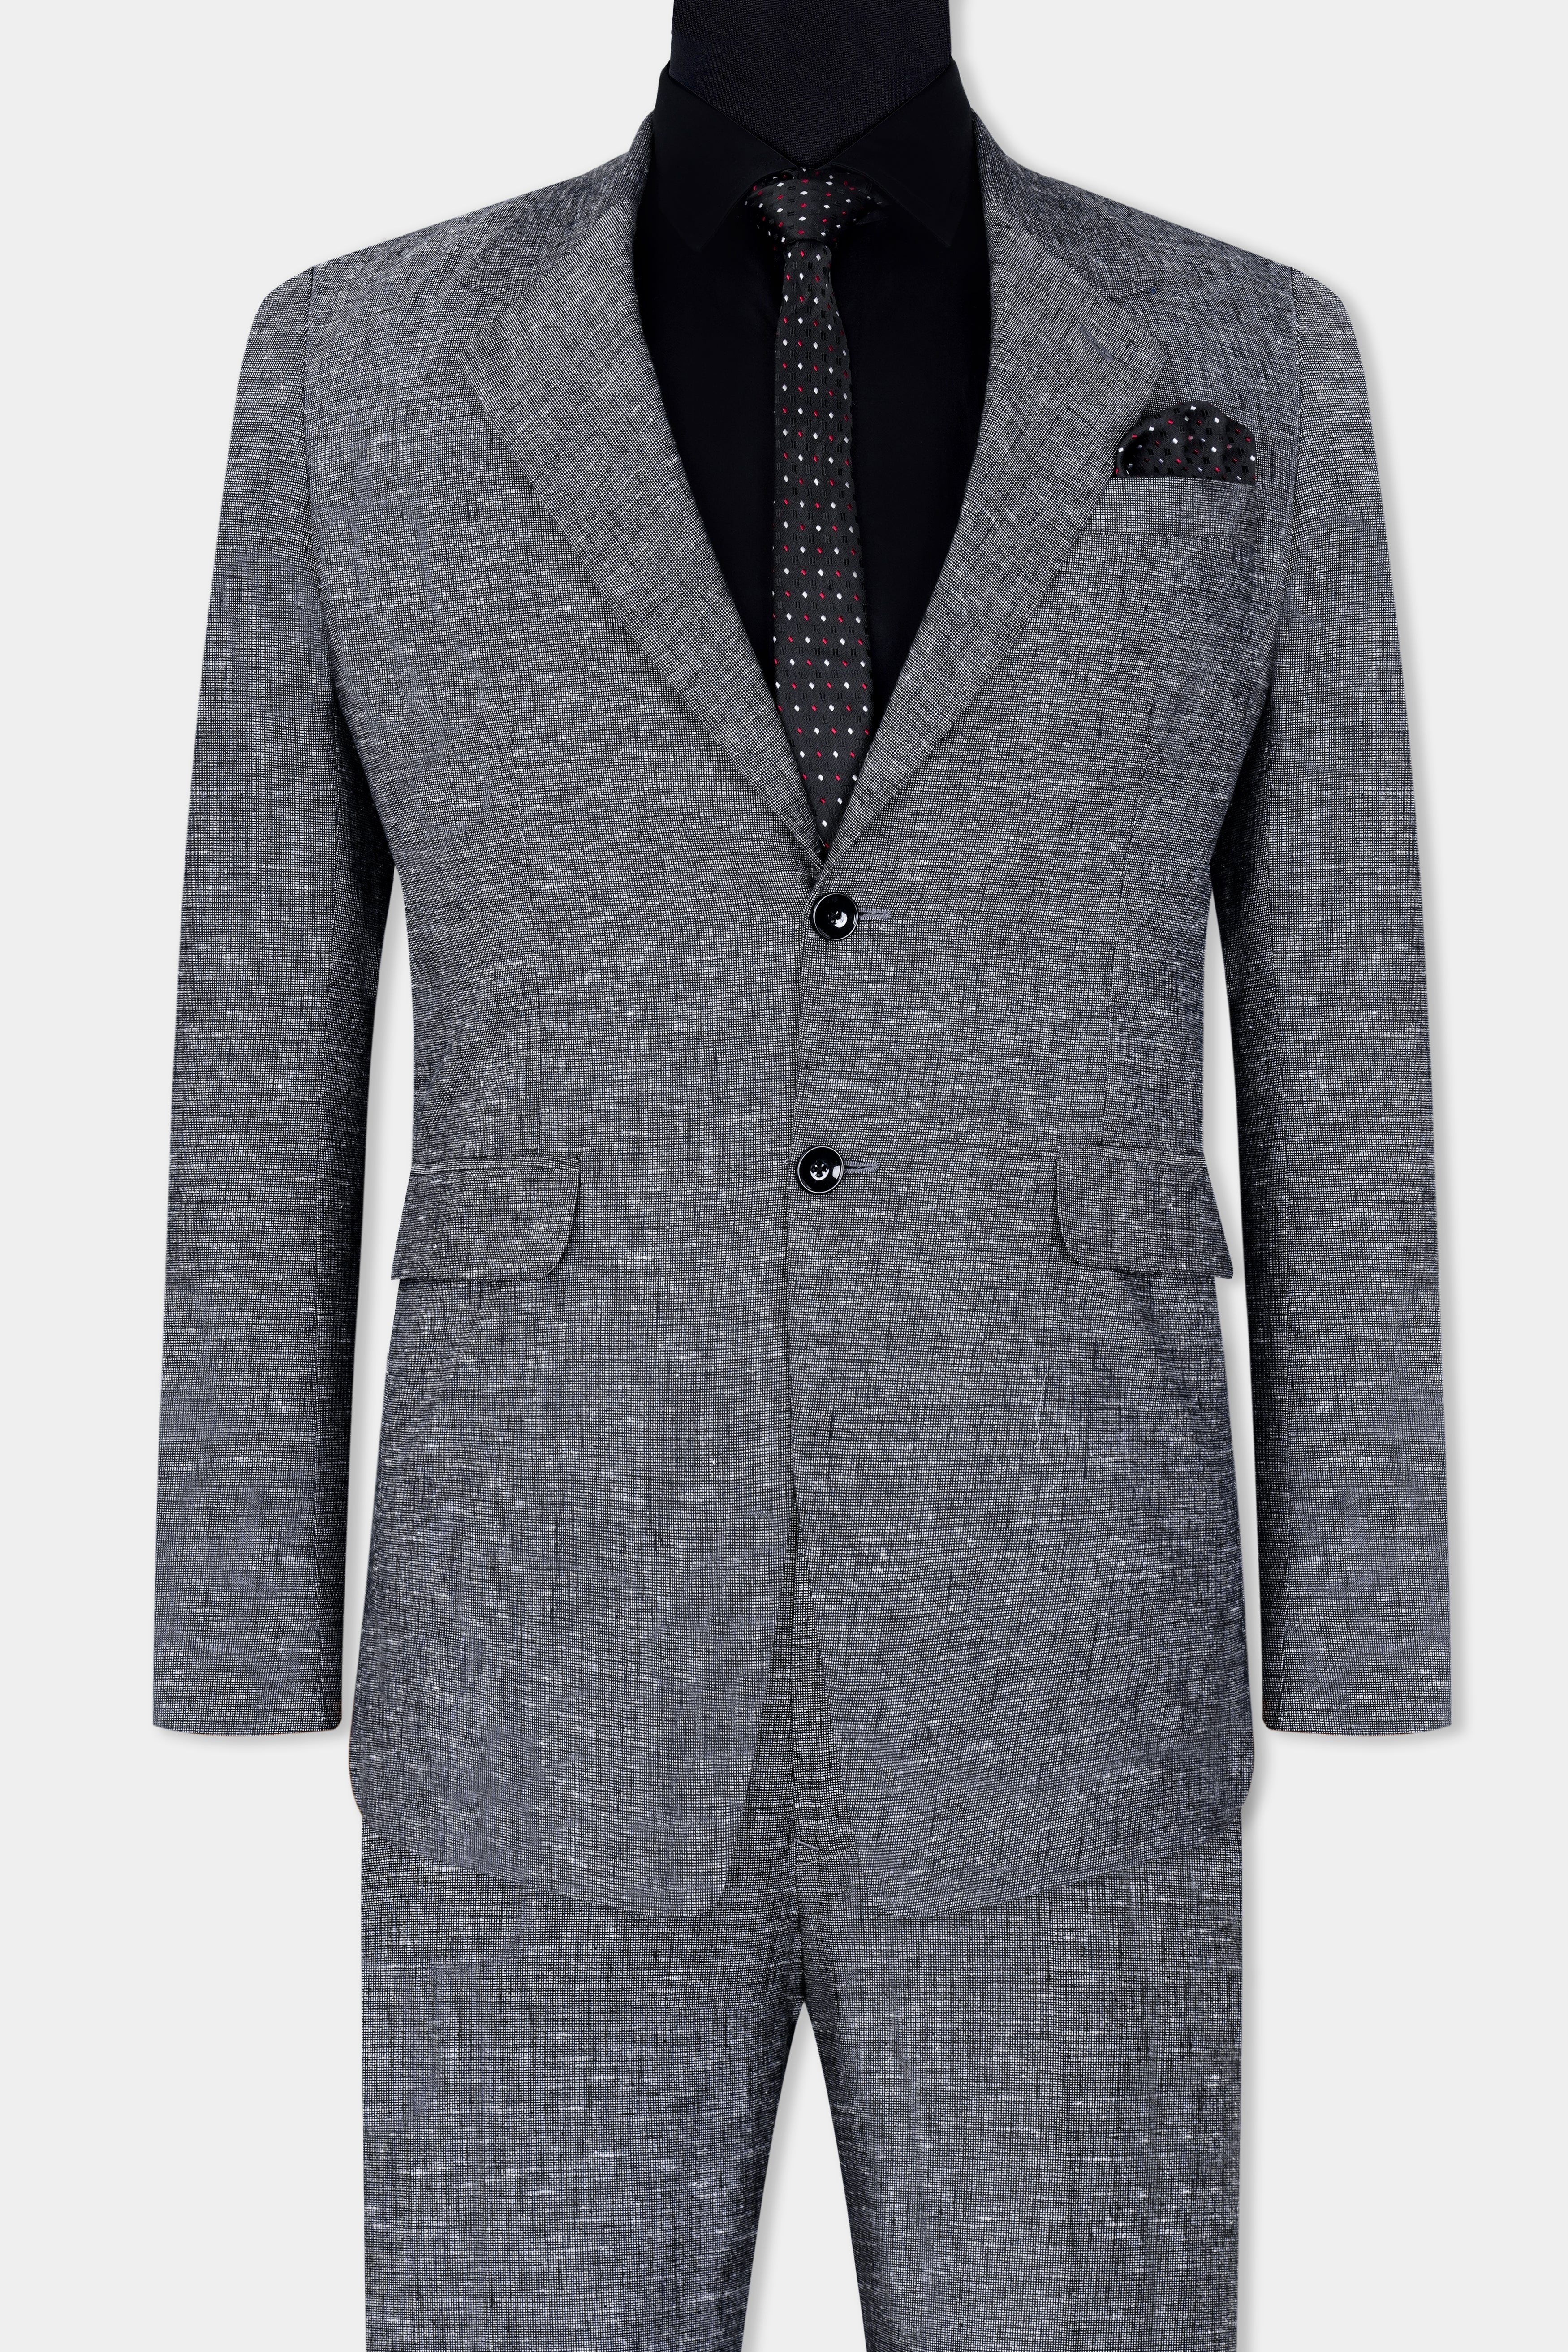 Dim Gray Luxurious Linen Single Breasted Suit ST2923-SB-36,ST2923-SB-38,ST2923-SB-40,ST2923-SB-42,ST2923-SB-44,ST2923-SB-46,ST2923-SB-48,ST2923-SB-50,ST2923-SB-52,ST2923-SB-54,ST2923-SB-56,ST2923-SB-58,ST2923-SB-60